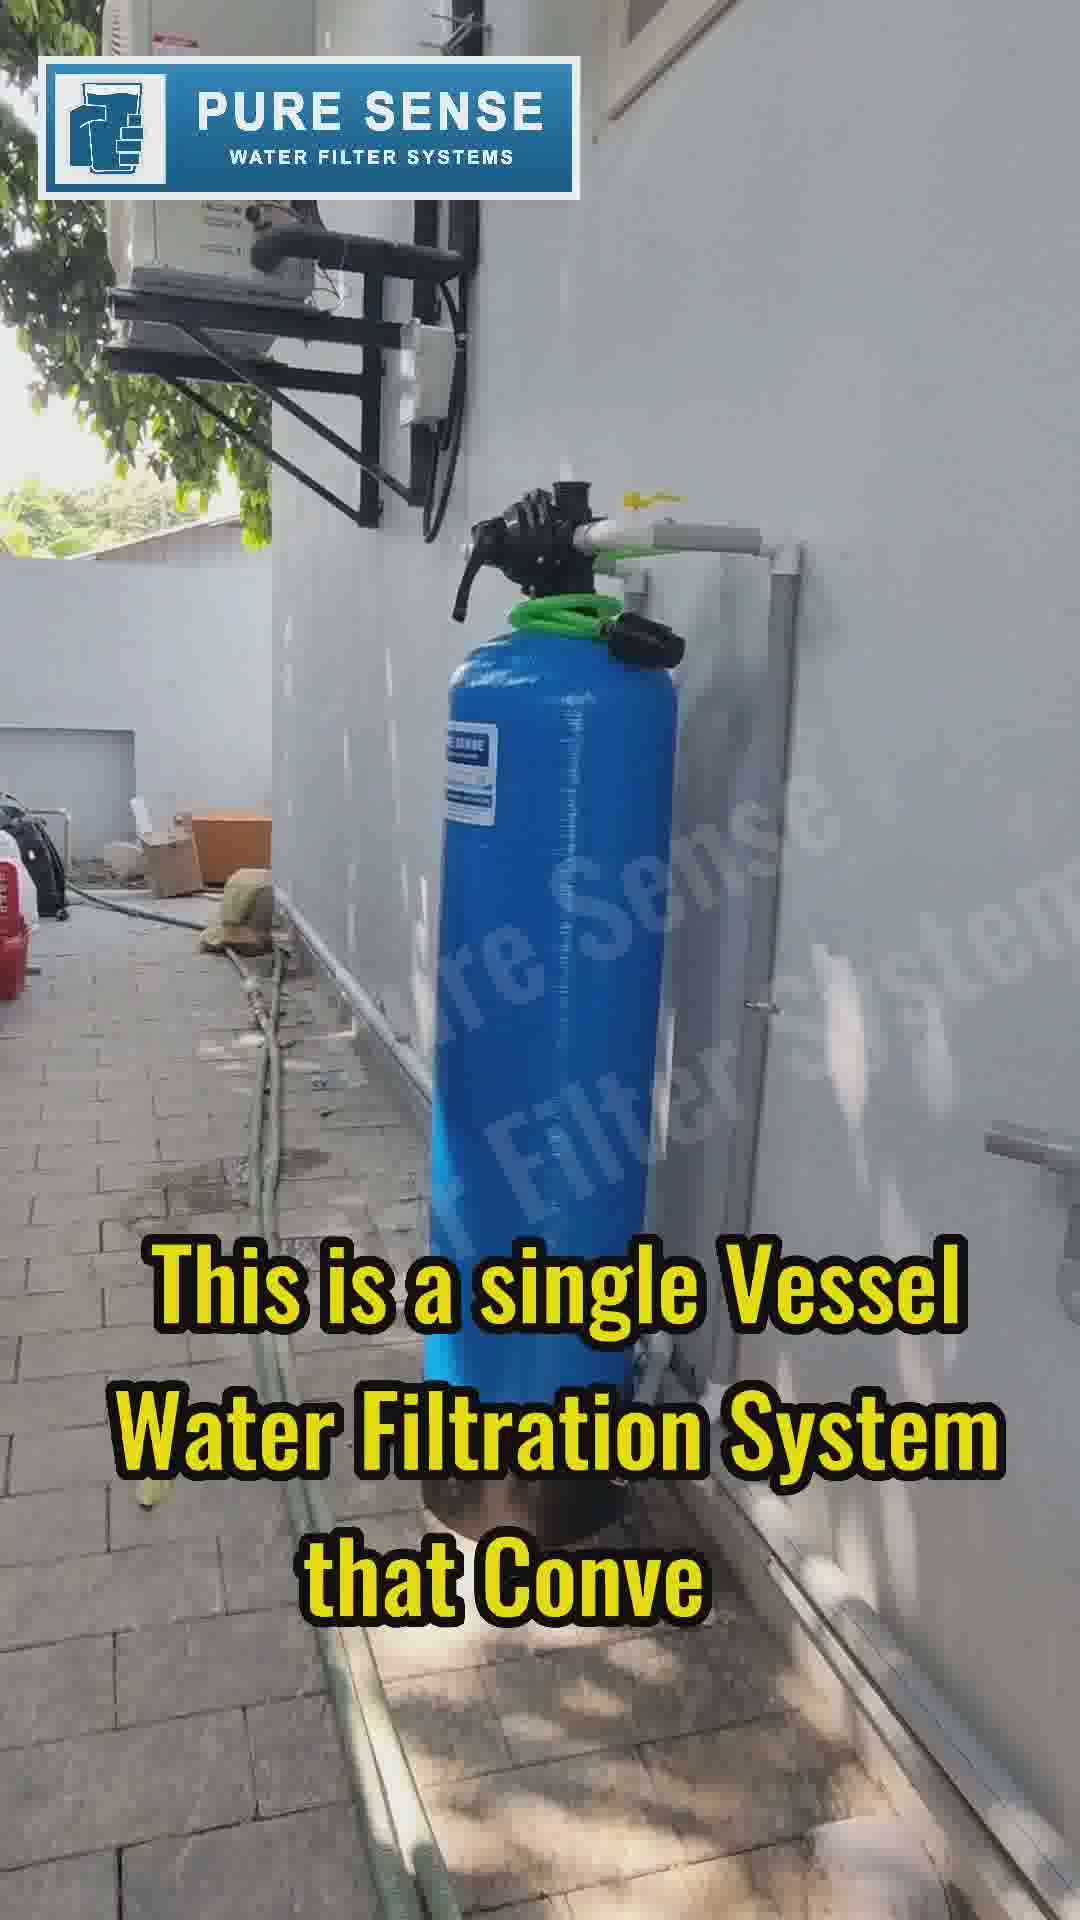 This is a single Vessel Water Filtration System that Converts
Hard Water into Soft Water. The Best Solution is available in the market for Borewell or well Hard Water. The Best Water Softener.


#water
#WaterPurifier
#WaterFilter
#borewellwaterfilter  #watertreatmentexperts
#Watertreatment
#waterpurification
#water_treatment
#watersoftener
#water_puririer
#borewell
#WaterPurity
#drinkingwater
#UV
#water_tank
#WaterPurity
#WaterTank
#filterrwork
#filtration
#filter
#filtersetting
#DrinkPure
#water
#purifierservice
#purification
#purifiers
#wellwater
#ironremover
#iron
#hard
#Soft
#softener
#PureSenseWaterFilterSystem
#Thrissur
#BorewellWaterFiltrationSystem
#BorewellWaterPurification
#BorewellWaterFilterPriceInKerala
#WaterFiltationSystemforHomePrice